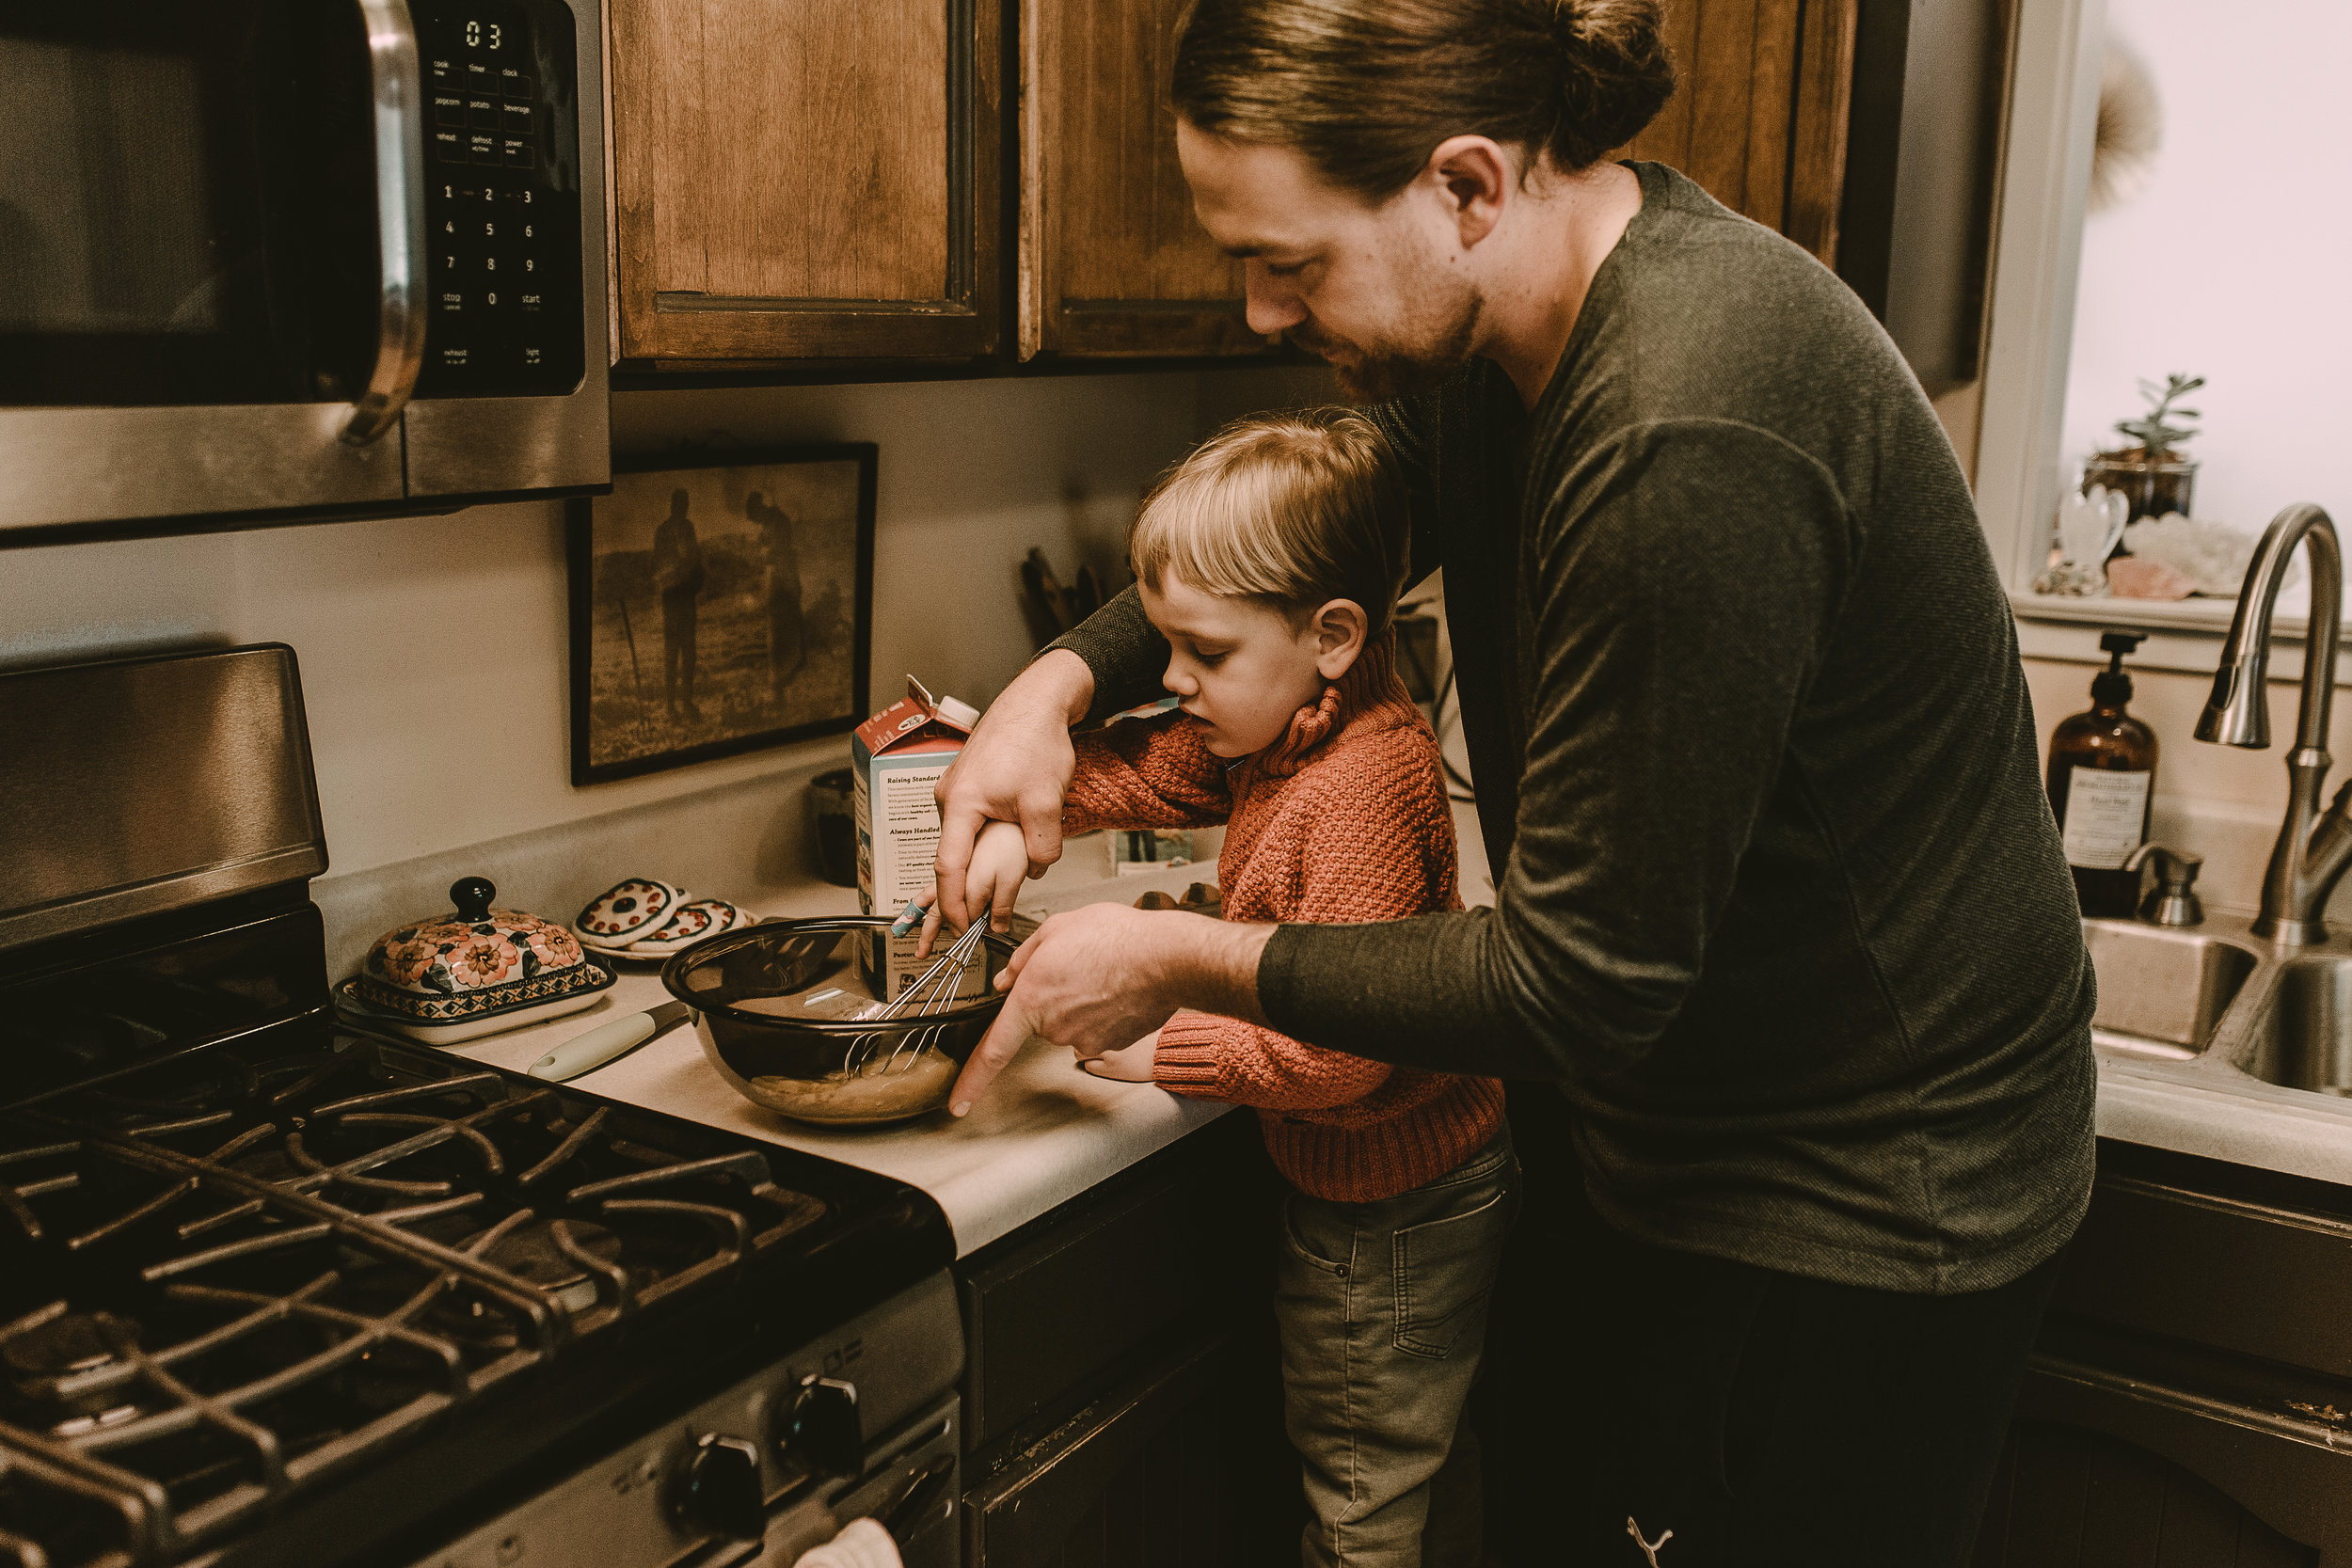  Dad and toddler making breakfast in southern oregon home 